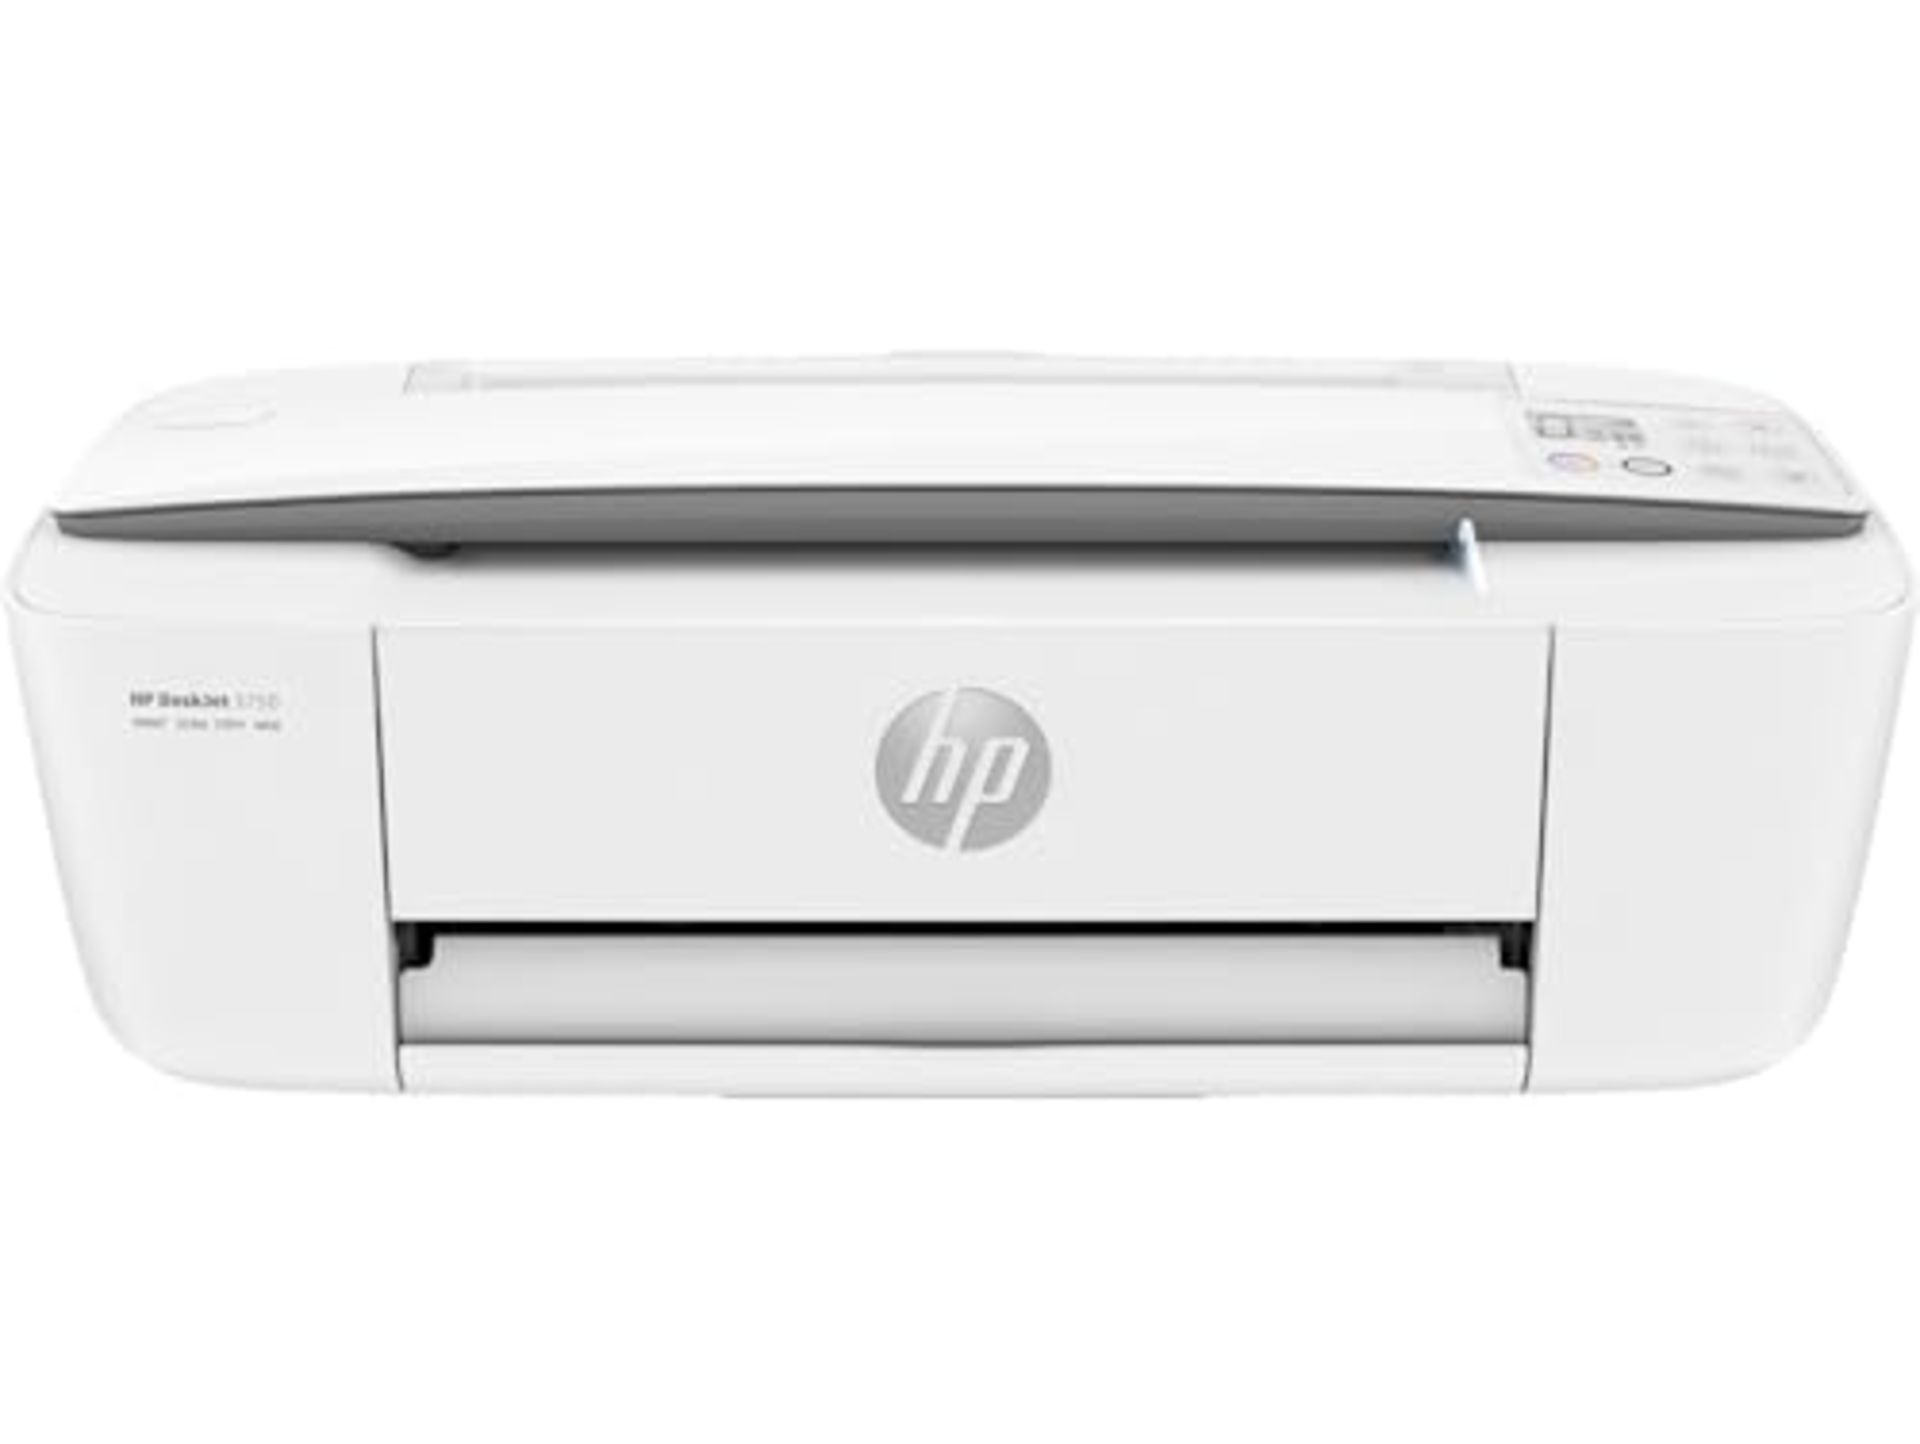 RRP £63.00 HP DeskJet 3750 Multifunction printer, 4 months of free printing with HP Instant Ink i